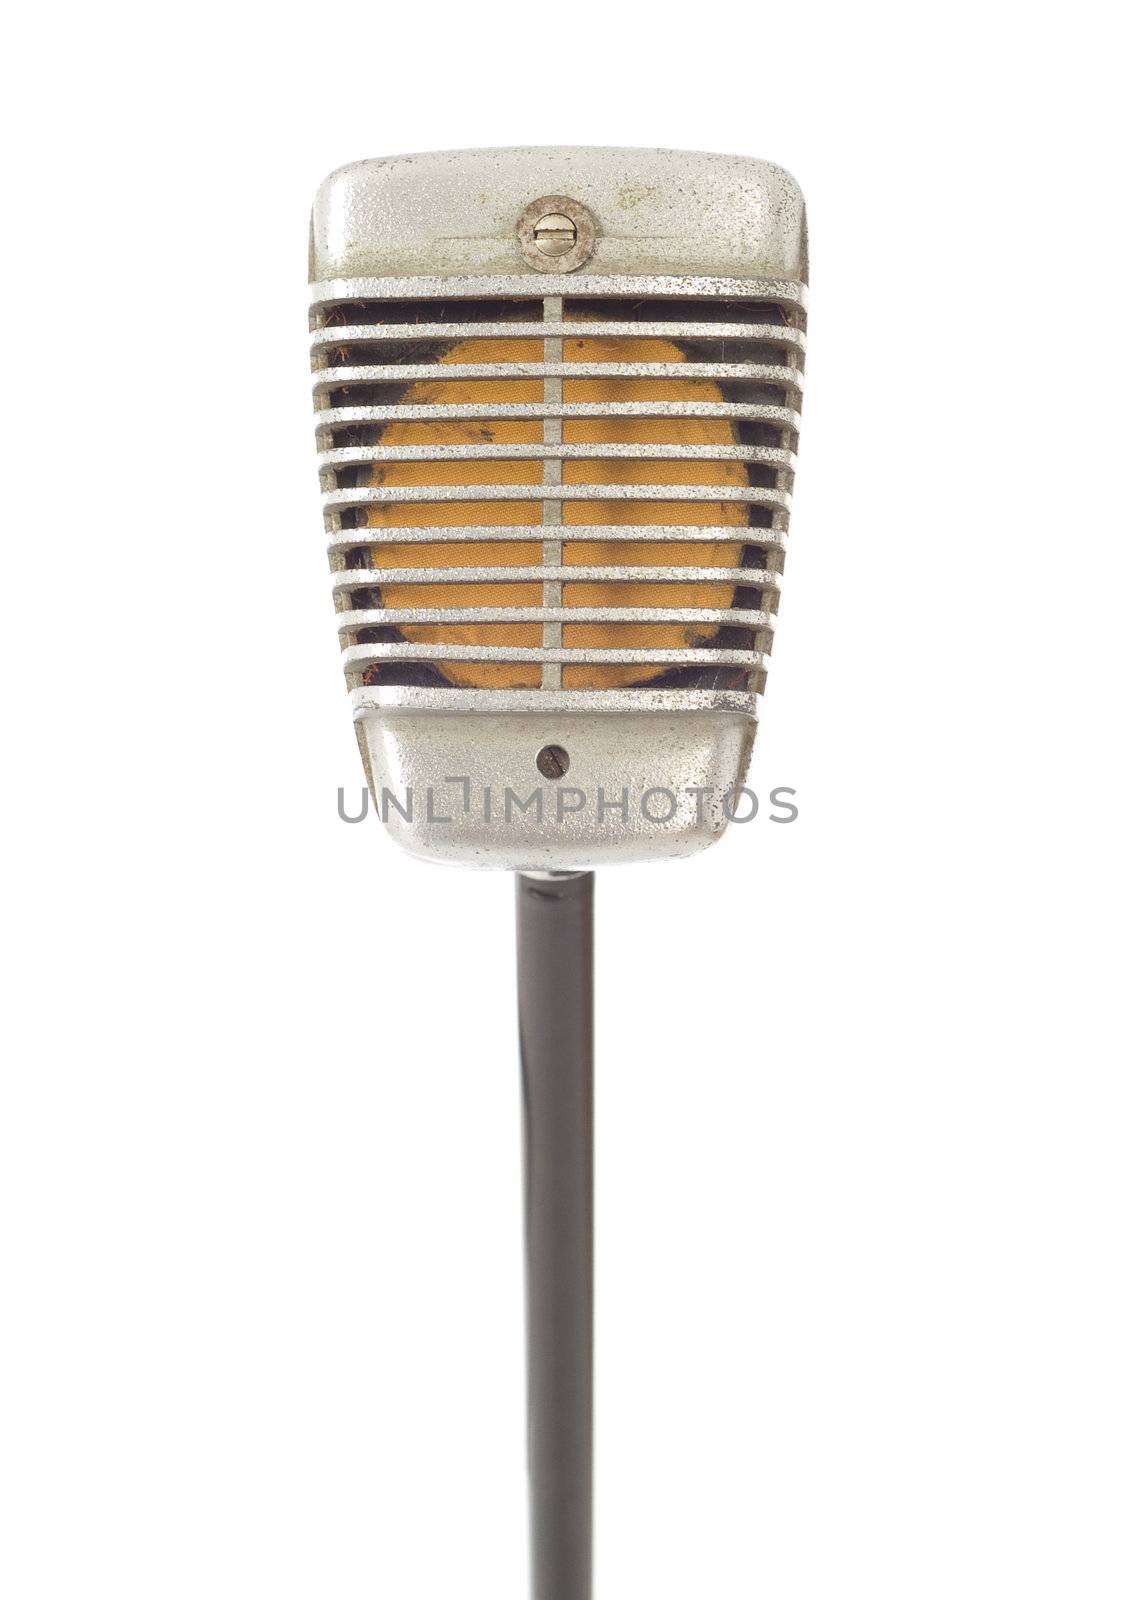 Vintage microphone by alistaircotton